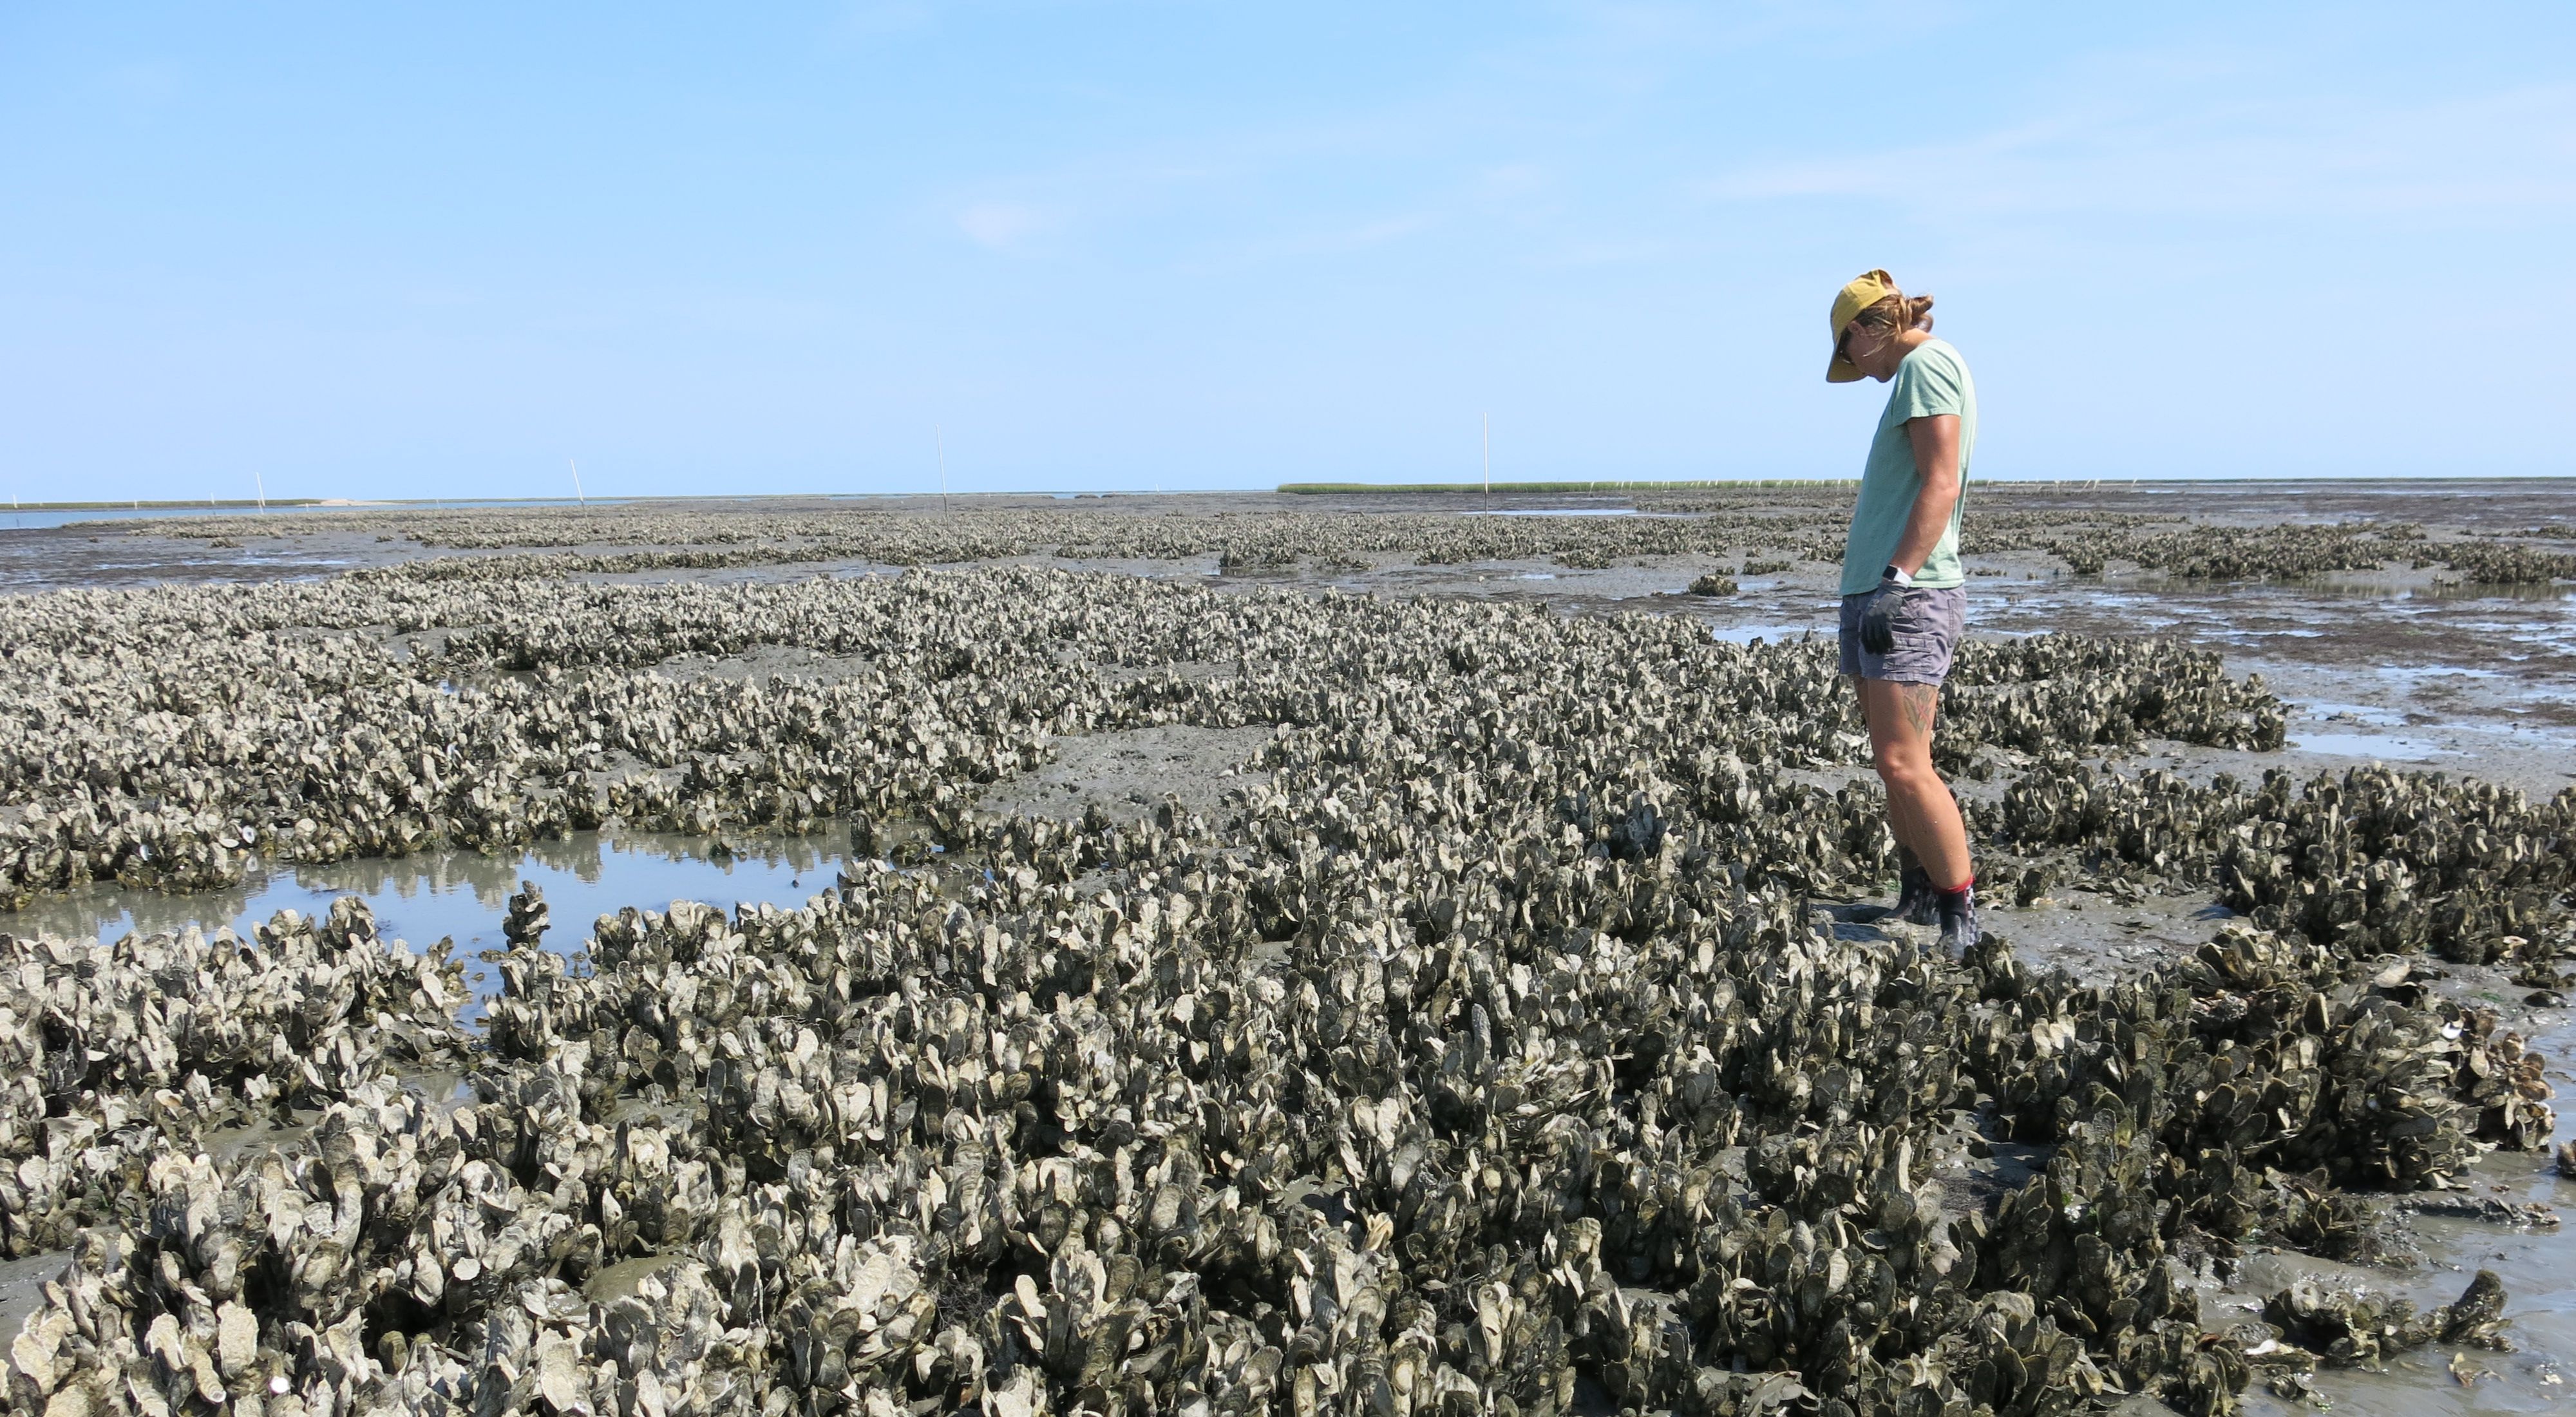 A woman stands in shallow water amongst a large cluster of oyster shells.